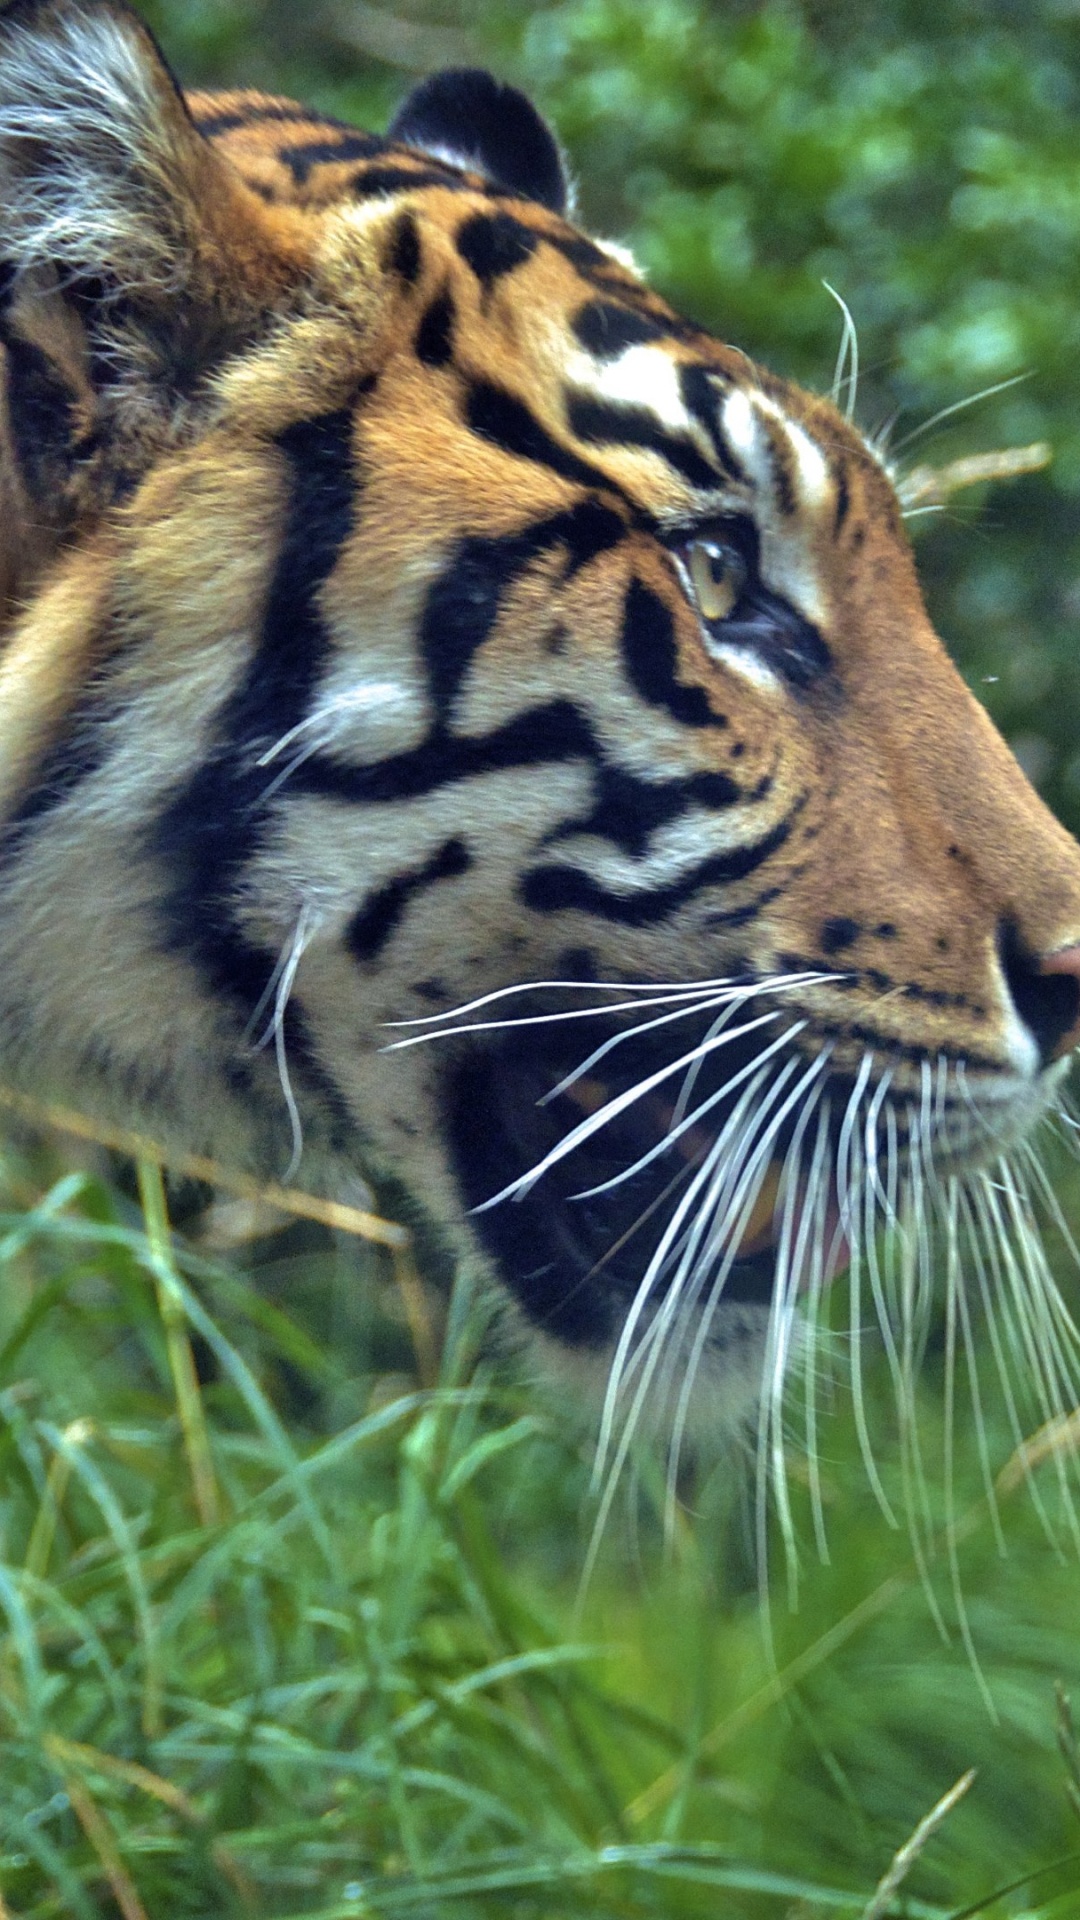 Brown and Black Tiger on Green Grass During Daytime. Wallpaper in 1080x1920 Resolution